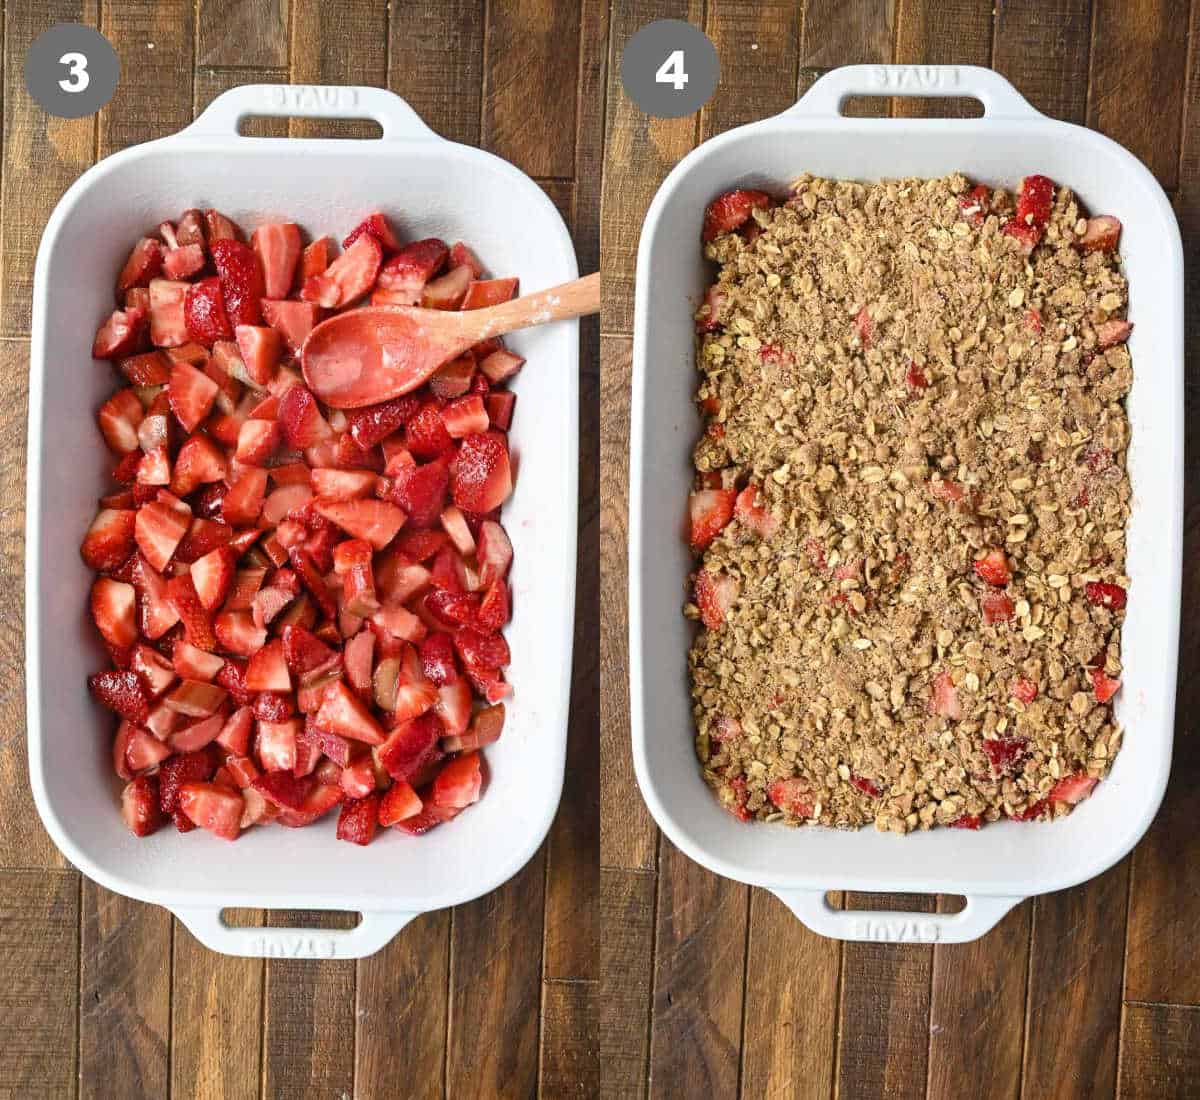 Strawberry and rhubarb placed in a baking dish and the crisp topping placed on top.